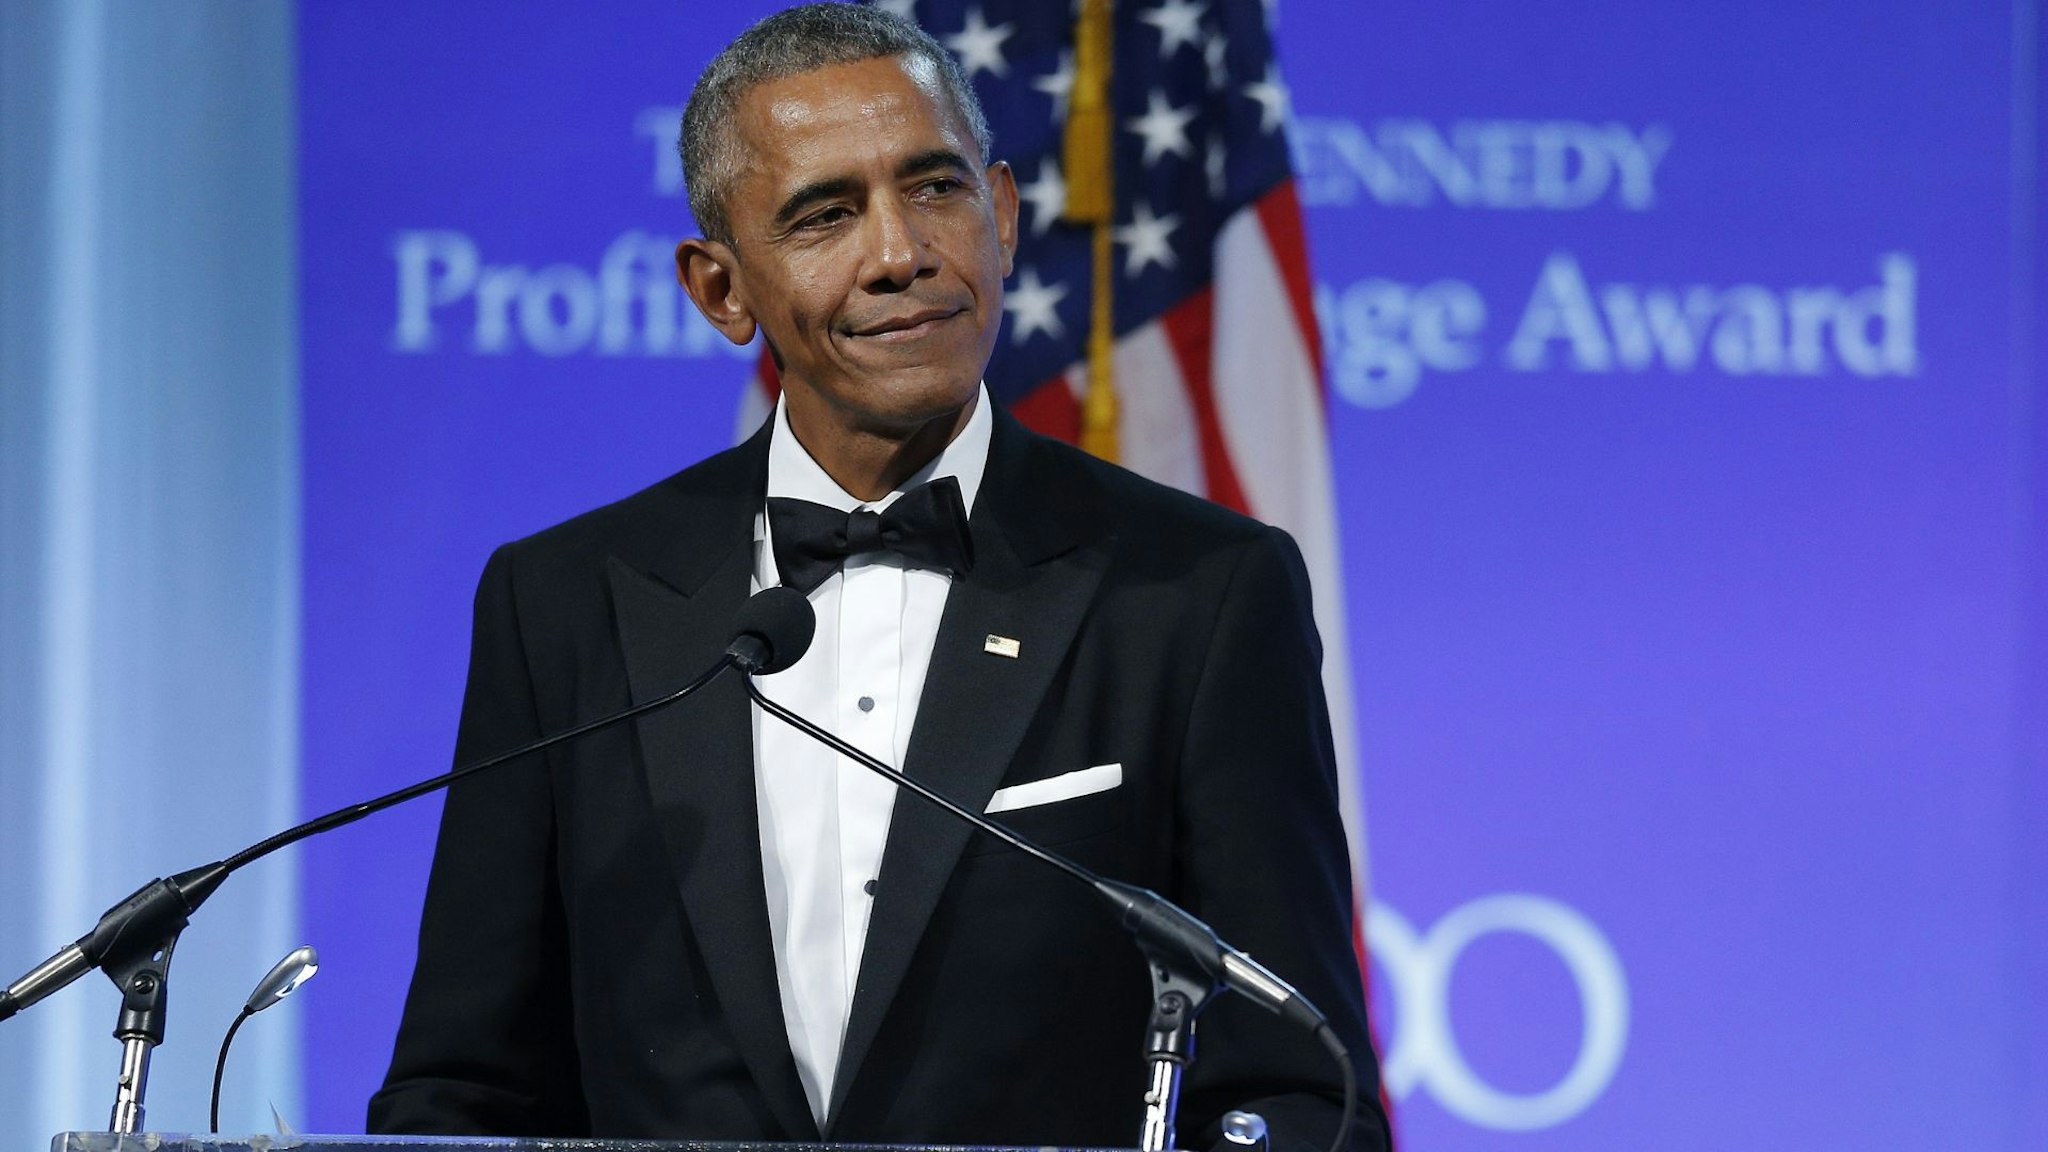 WASHINGTON, DC - MAY 7: Former U.S. President Barack Obama speaks after receiving the 2017 John F. Kennedy Profile In Courage Award from Caroline Kennedy at the John F. Kennedy Library May 7, 2017 in Boston, Massachusetts.